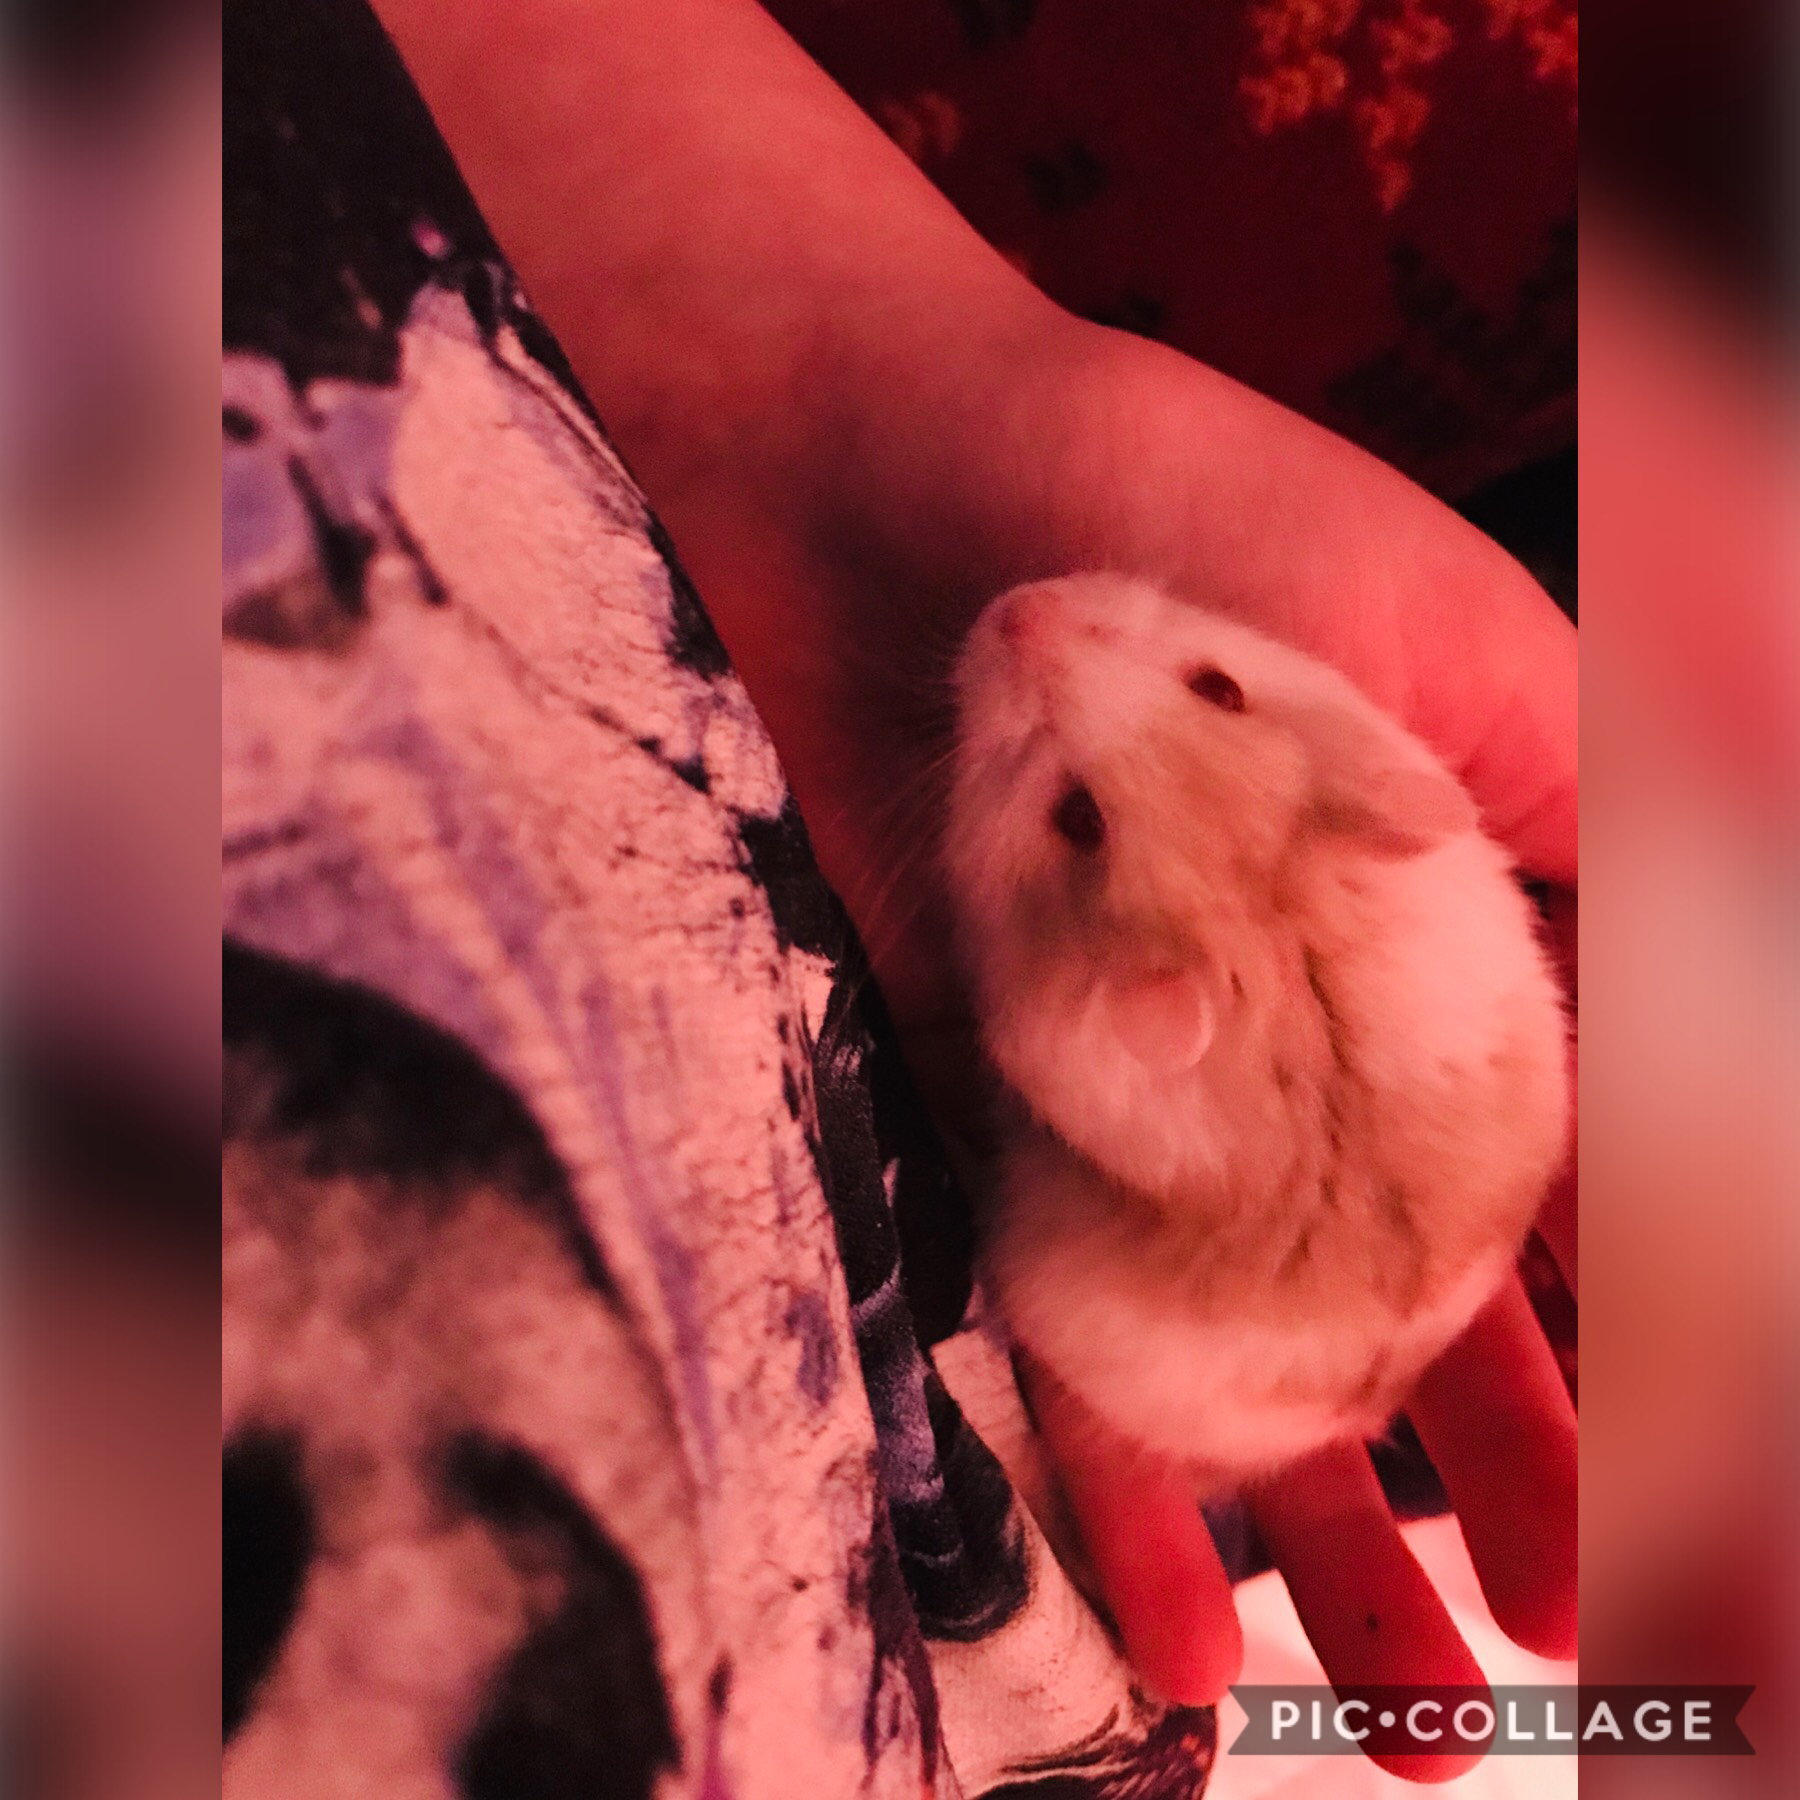 I got a hamster boy, his name is Aziraphale and he’s perfect he didn’t even bite me and A